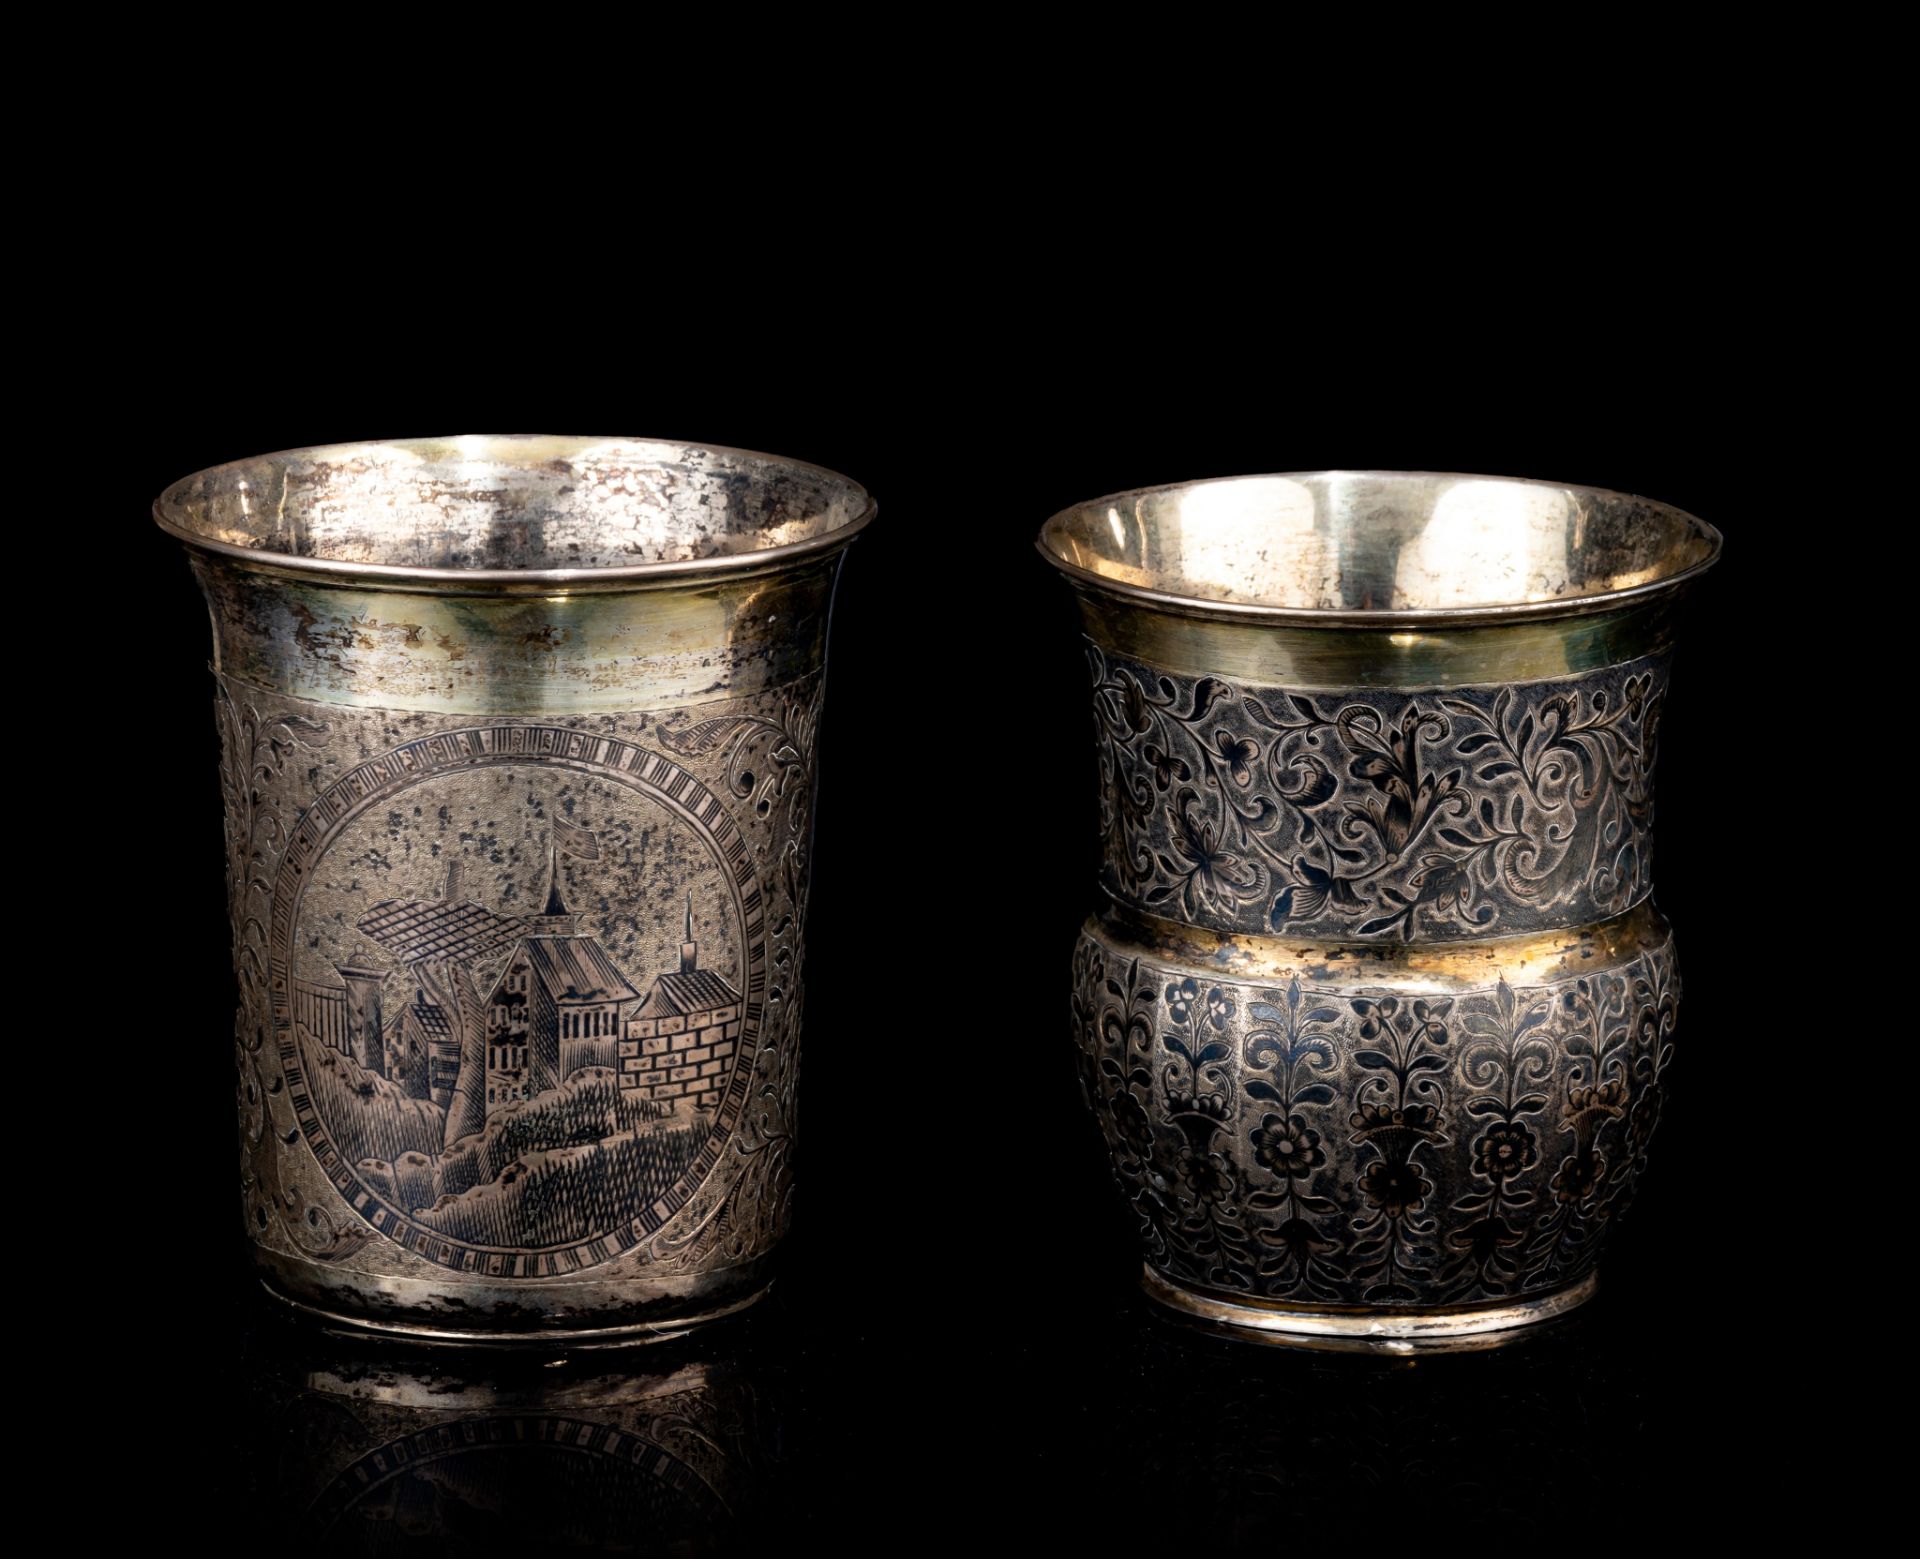 Two Russian silver-gilt and niello beakers, 84 zolotniki, H 9,5 - 10 cm - total weight: 357 g